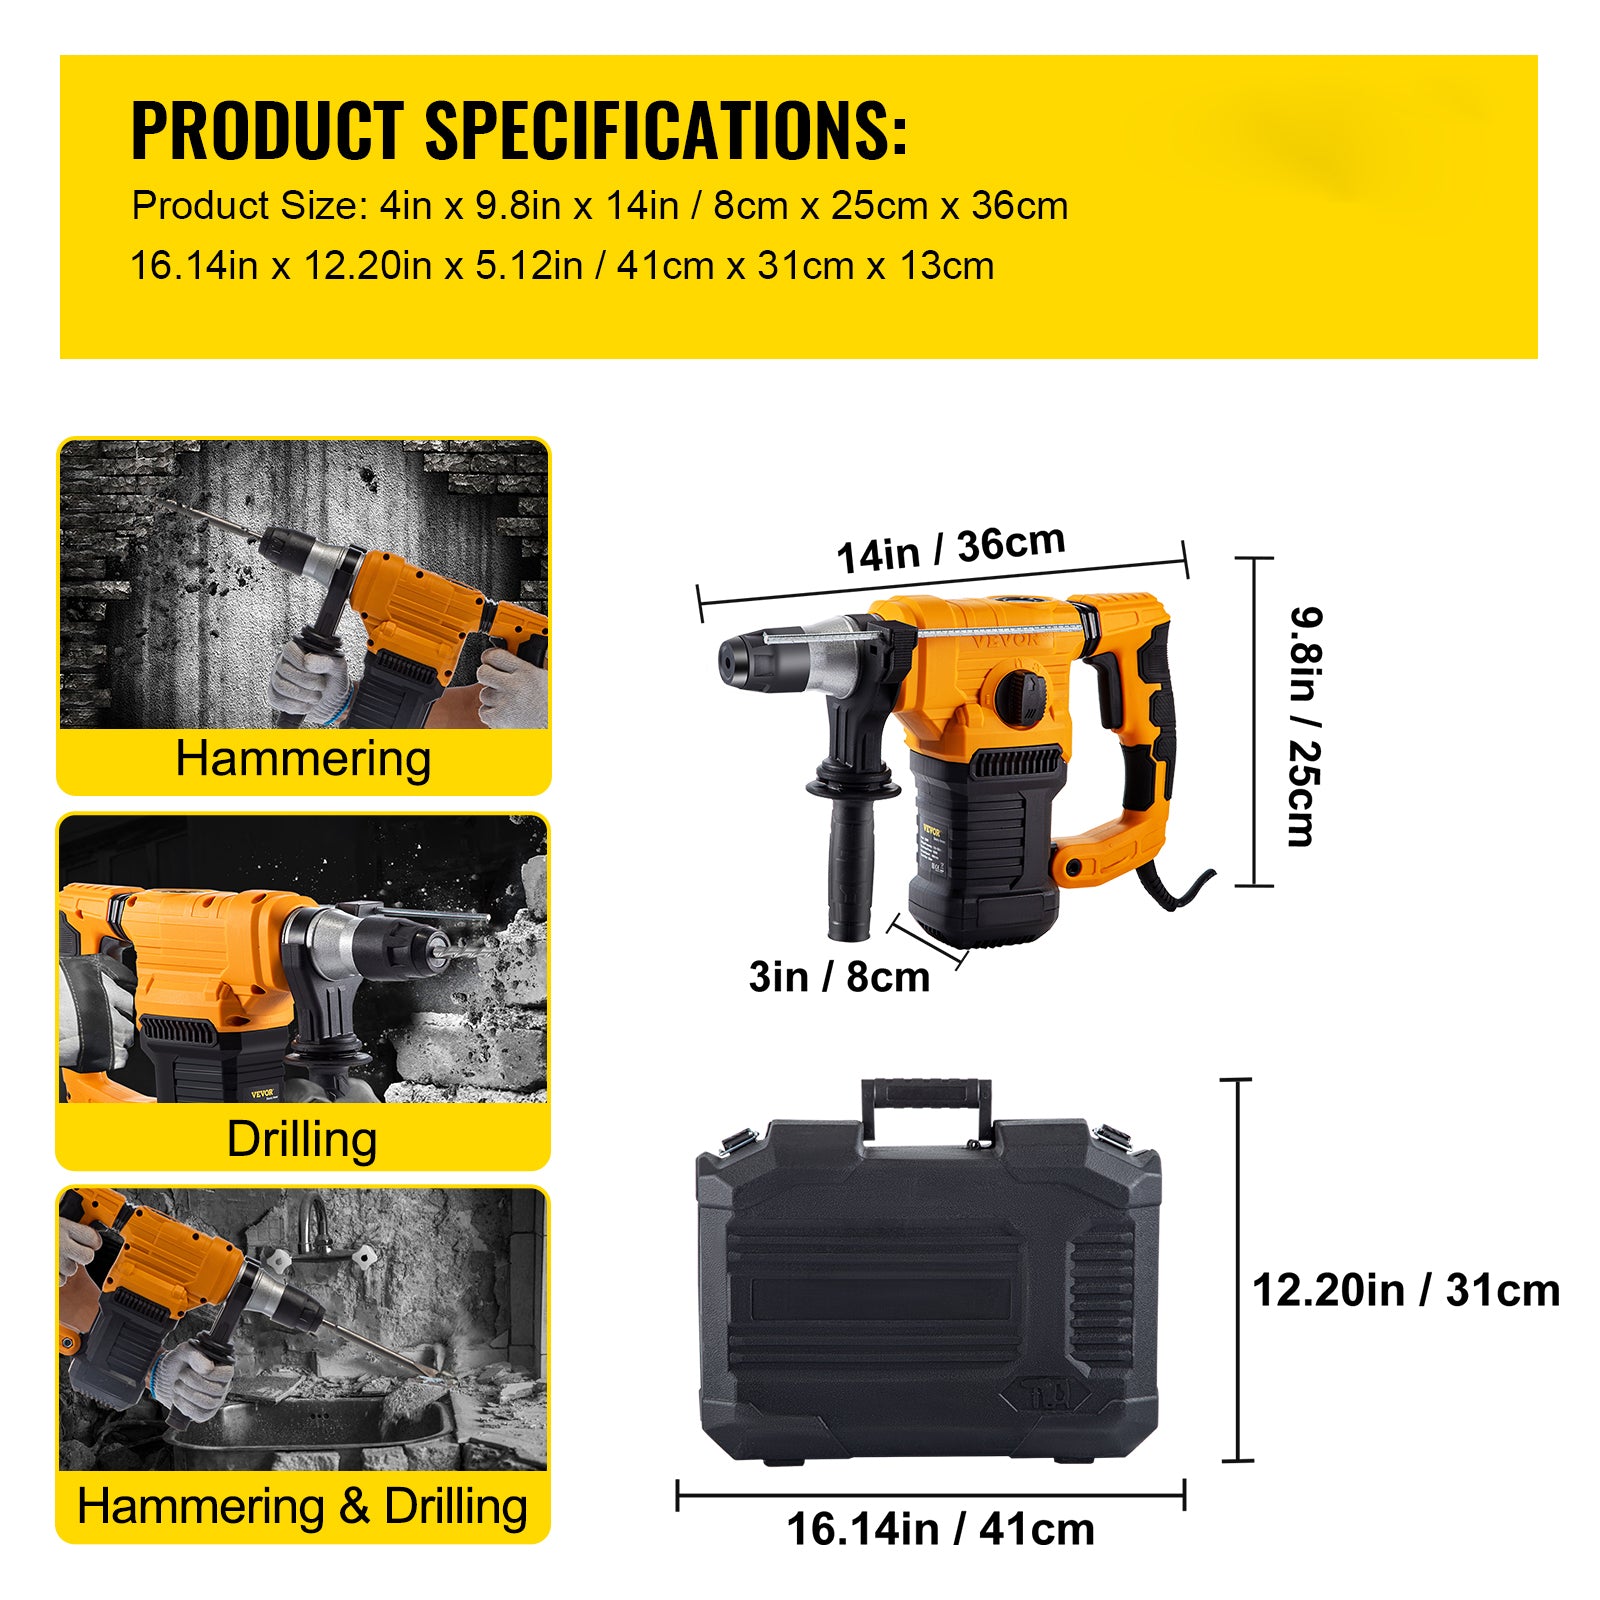 (Out of Stock) 13 AMP Electric Rotary Hammer SDS Plus Demolition Jackhammer Breaker 3 in1 Electric Wood Concrete Perforator